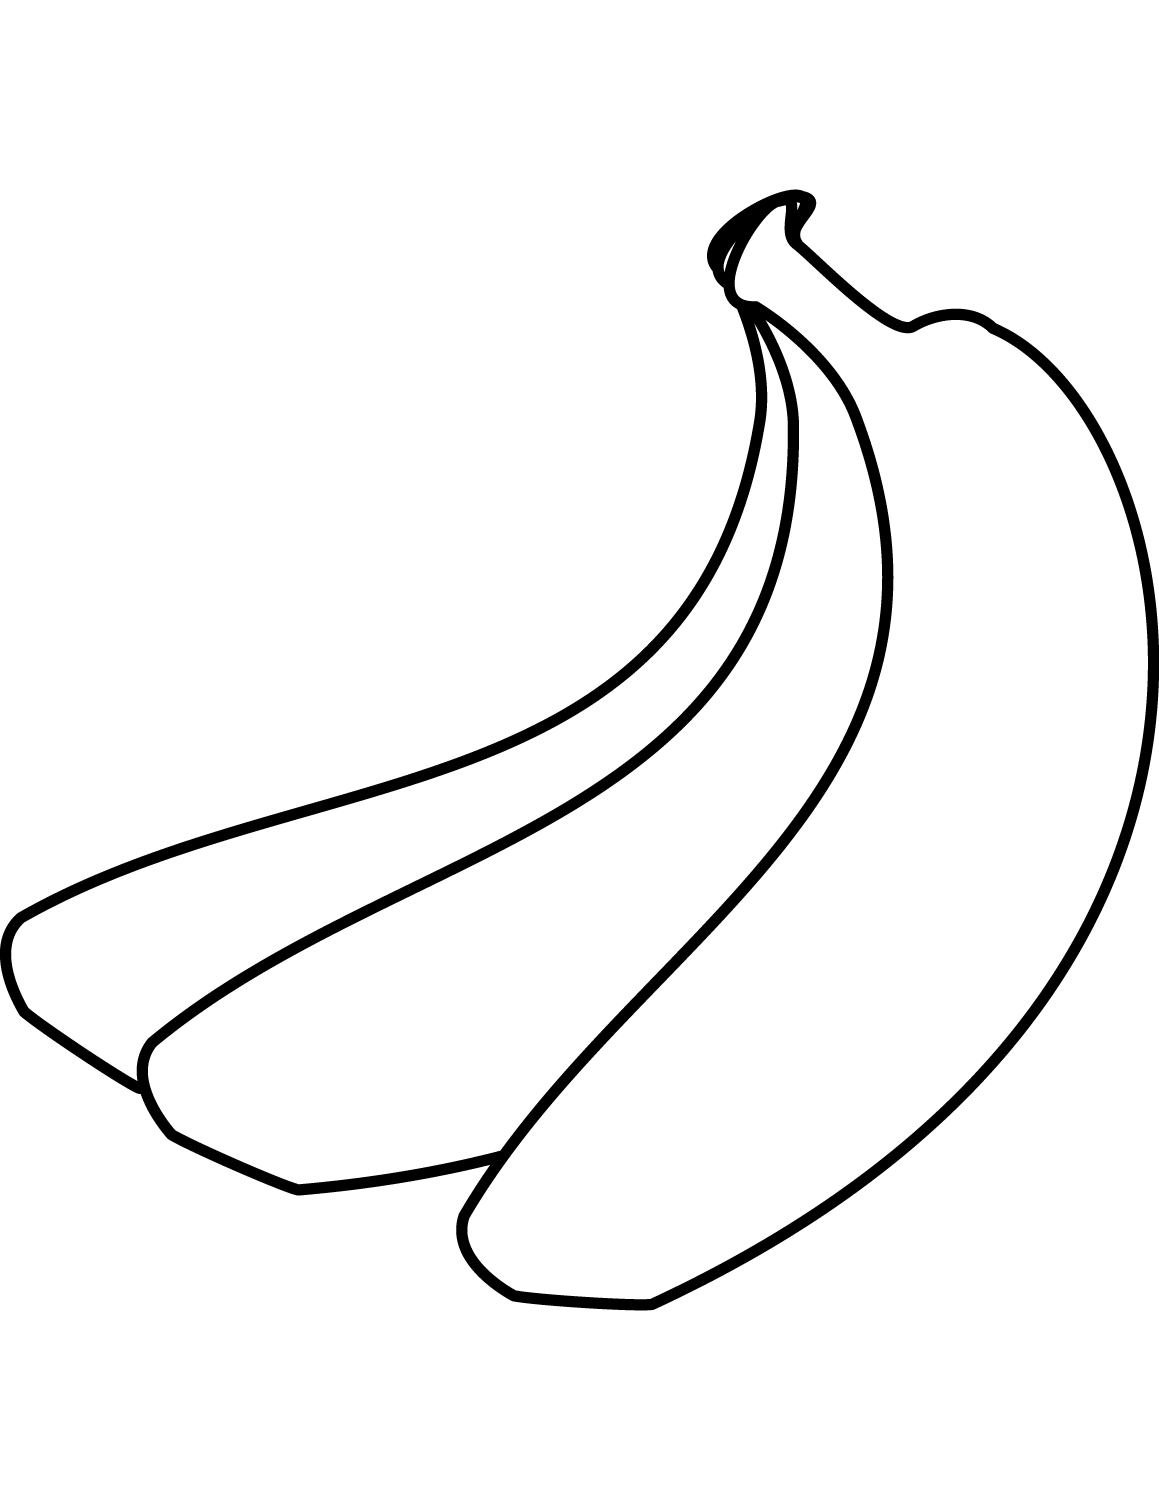 Three Bananas Coloring Page For You